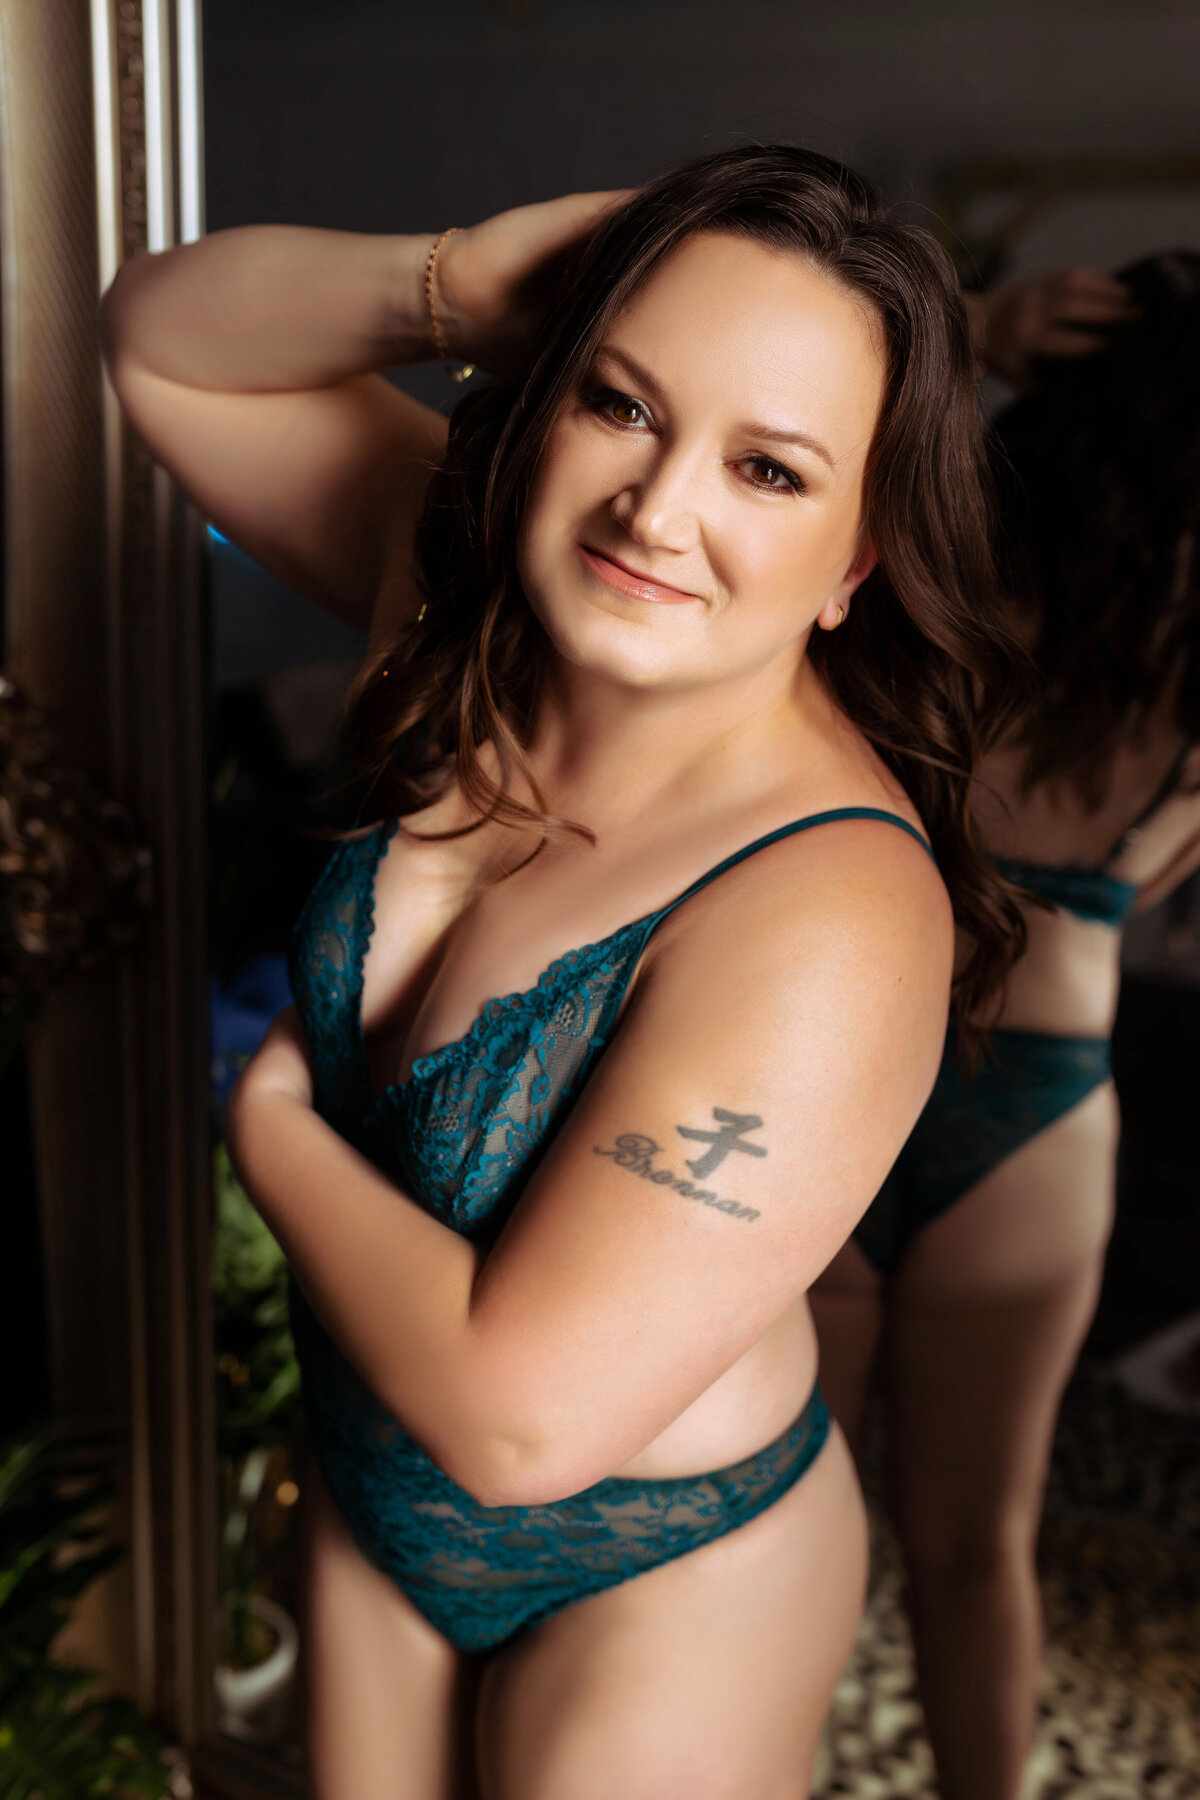 close up portrait of woman in blue lingerie leaning against mirror with tattoo during boudoir session elkridge